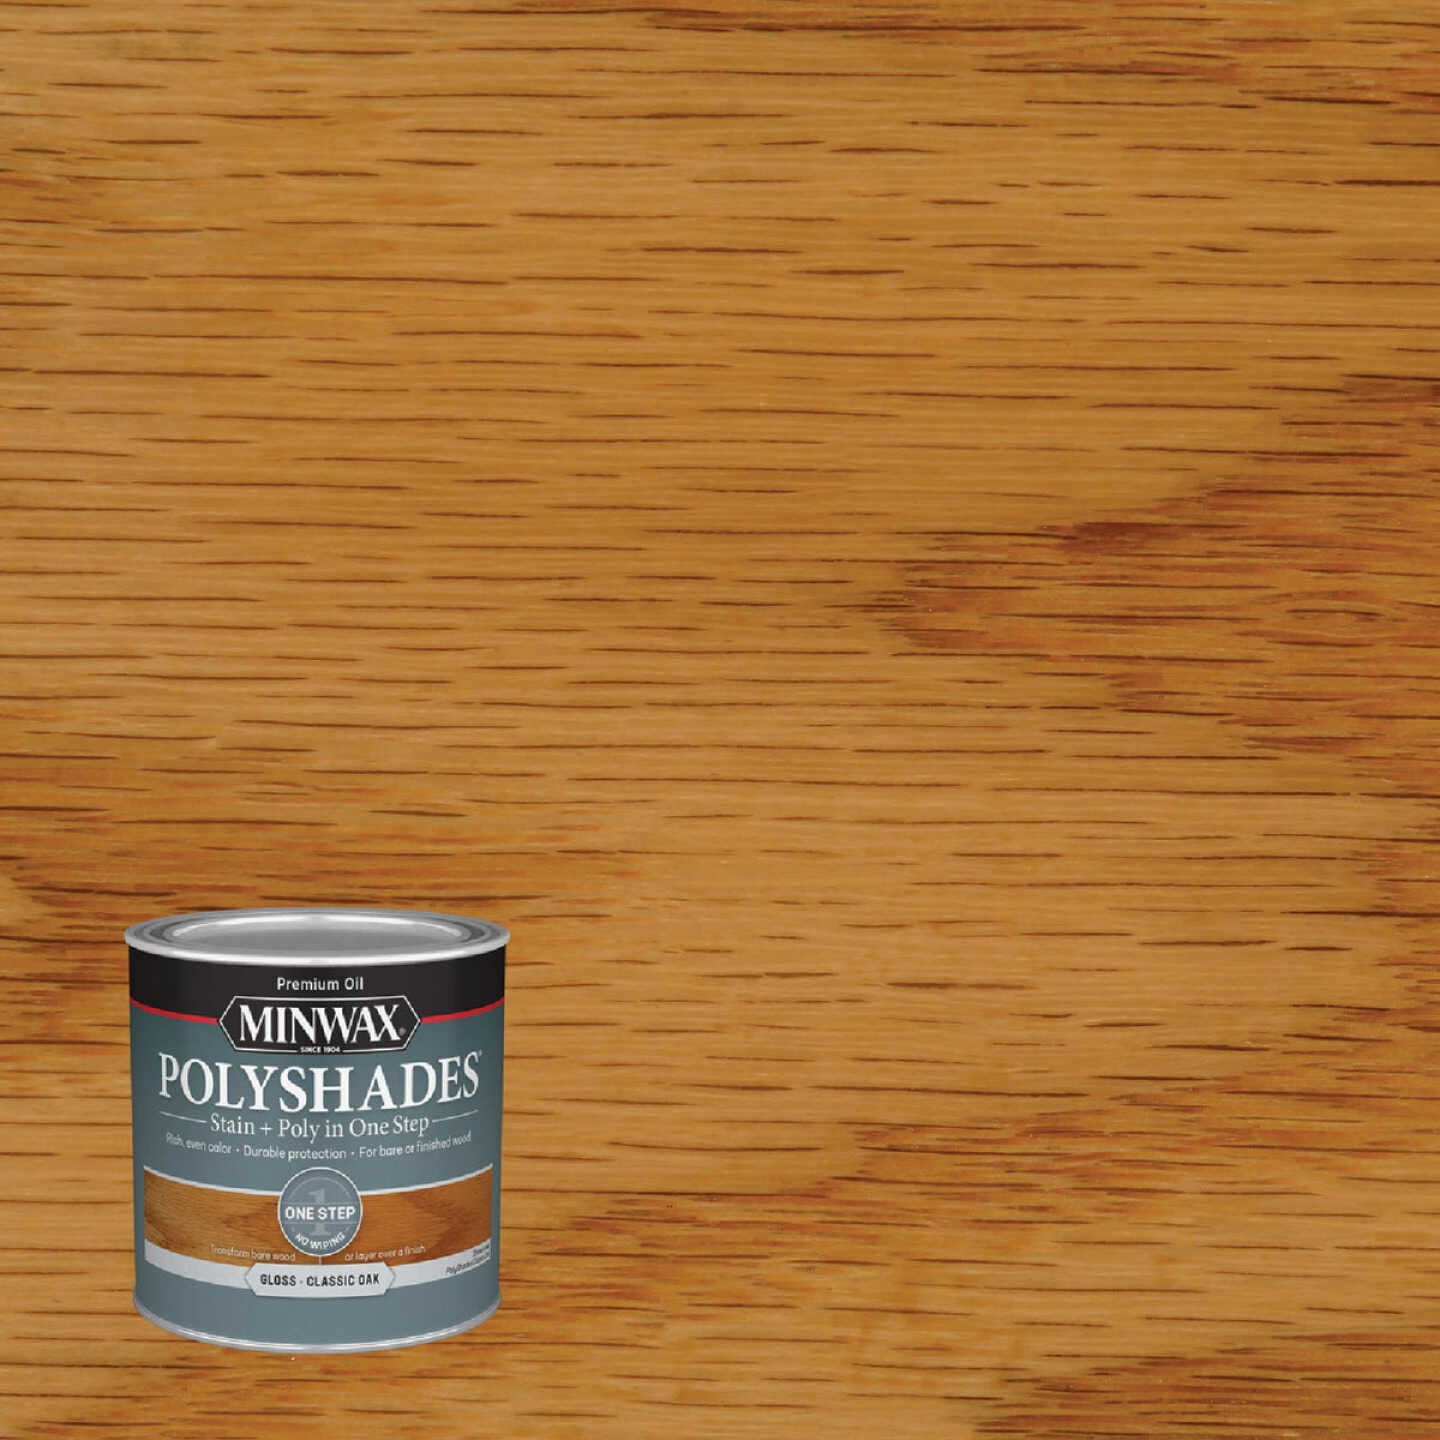 Minwax Polyshades 1/2 Pt. Gloss Stain & Finish Polyurethane In 1-Step,  Classic Oak - Parker's Building Supply